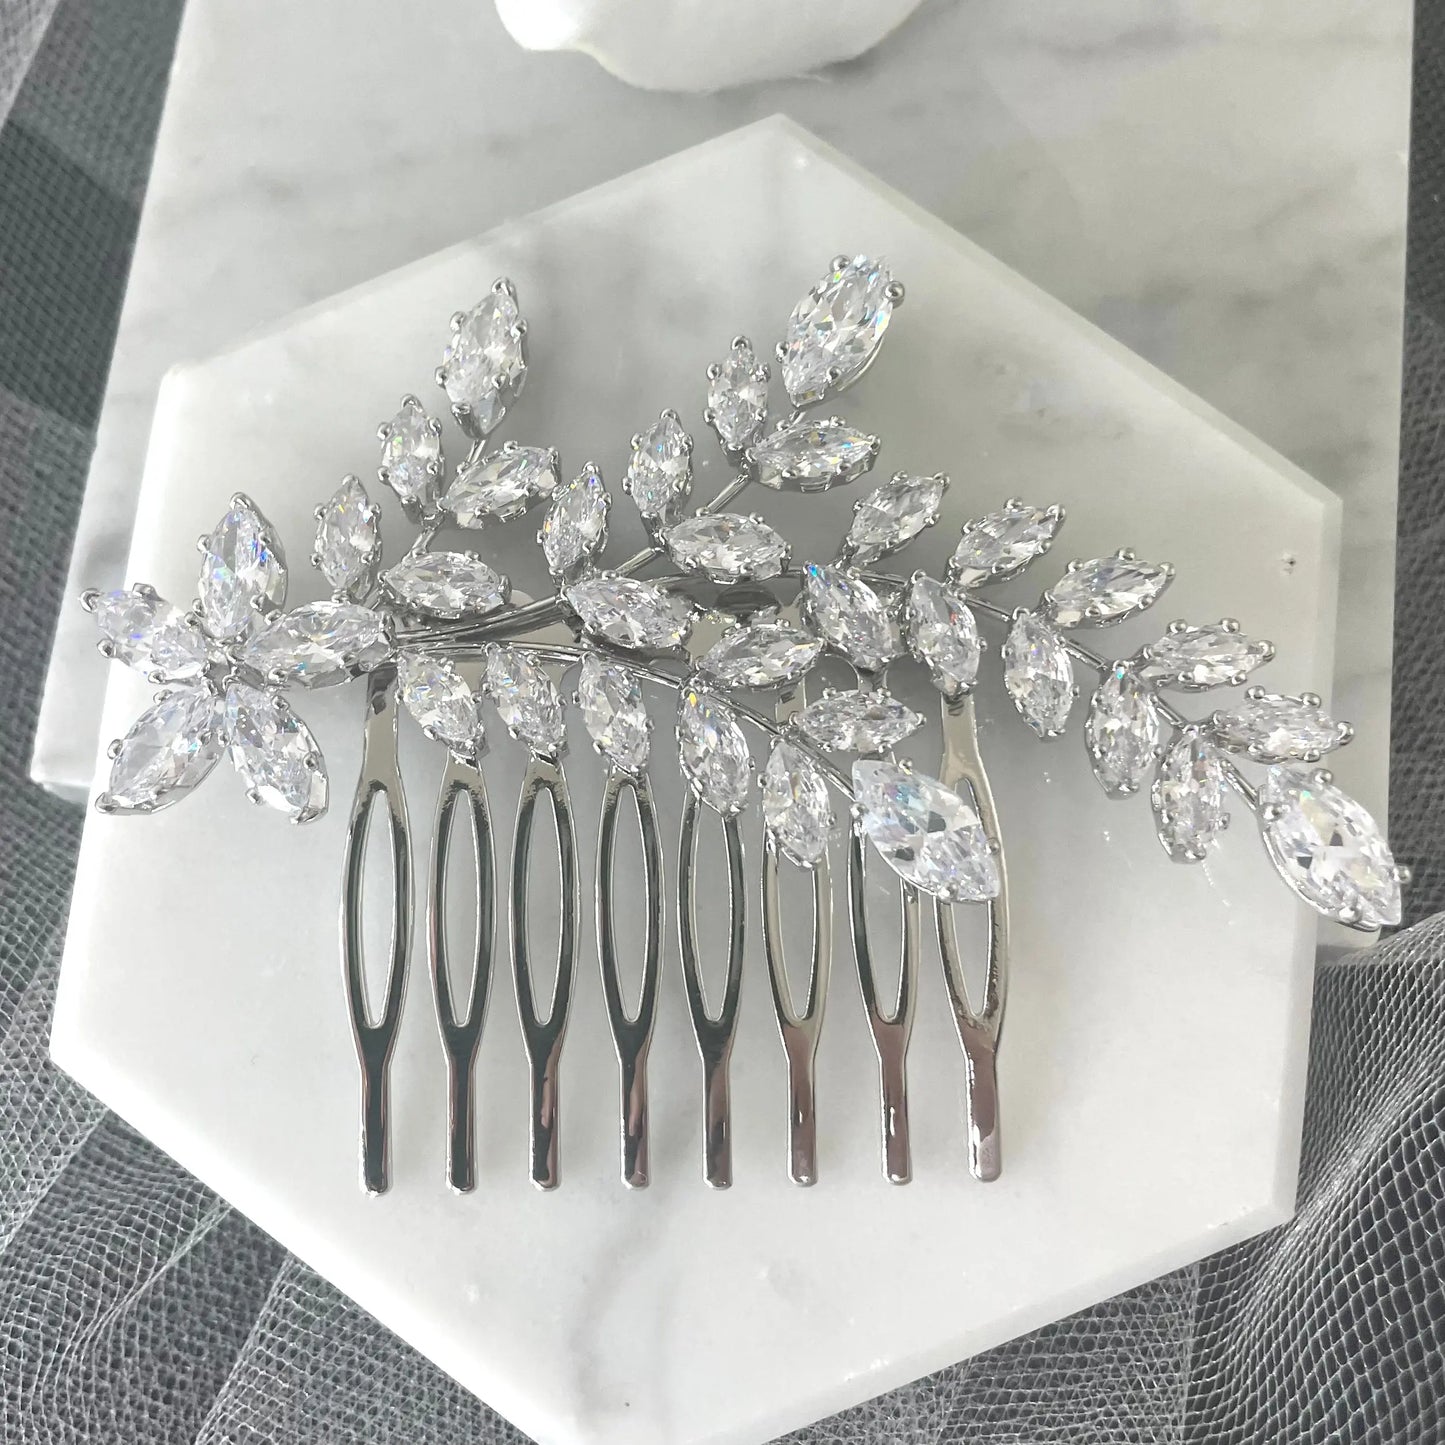 Sophisticated Ross Leaf Bridal Hair Comb in silver, adorned with sparkling marquise crystals, perfect for adding a contemporary and elegant touch to bridal hairstyles.